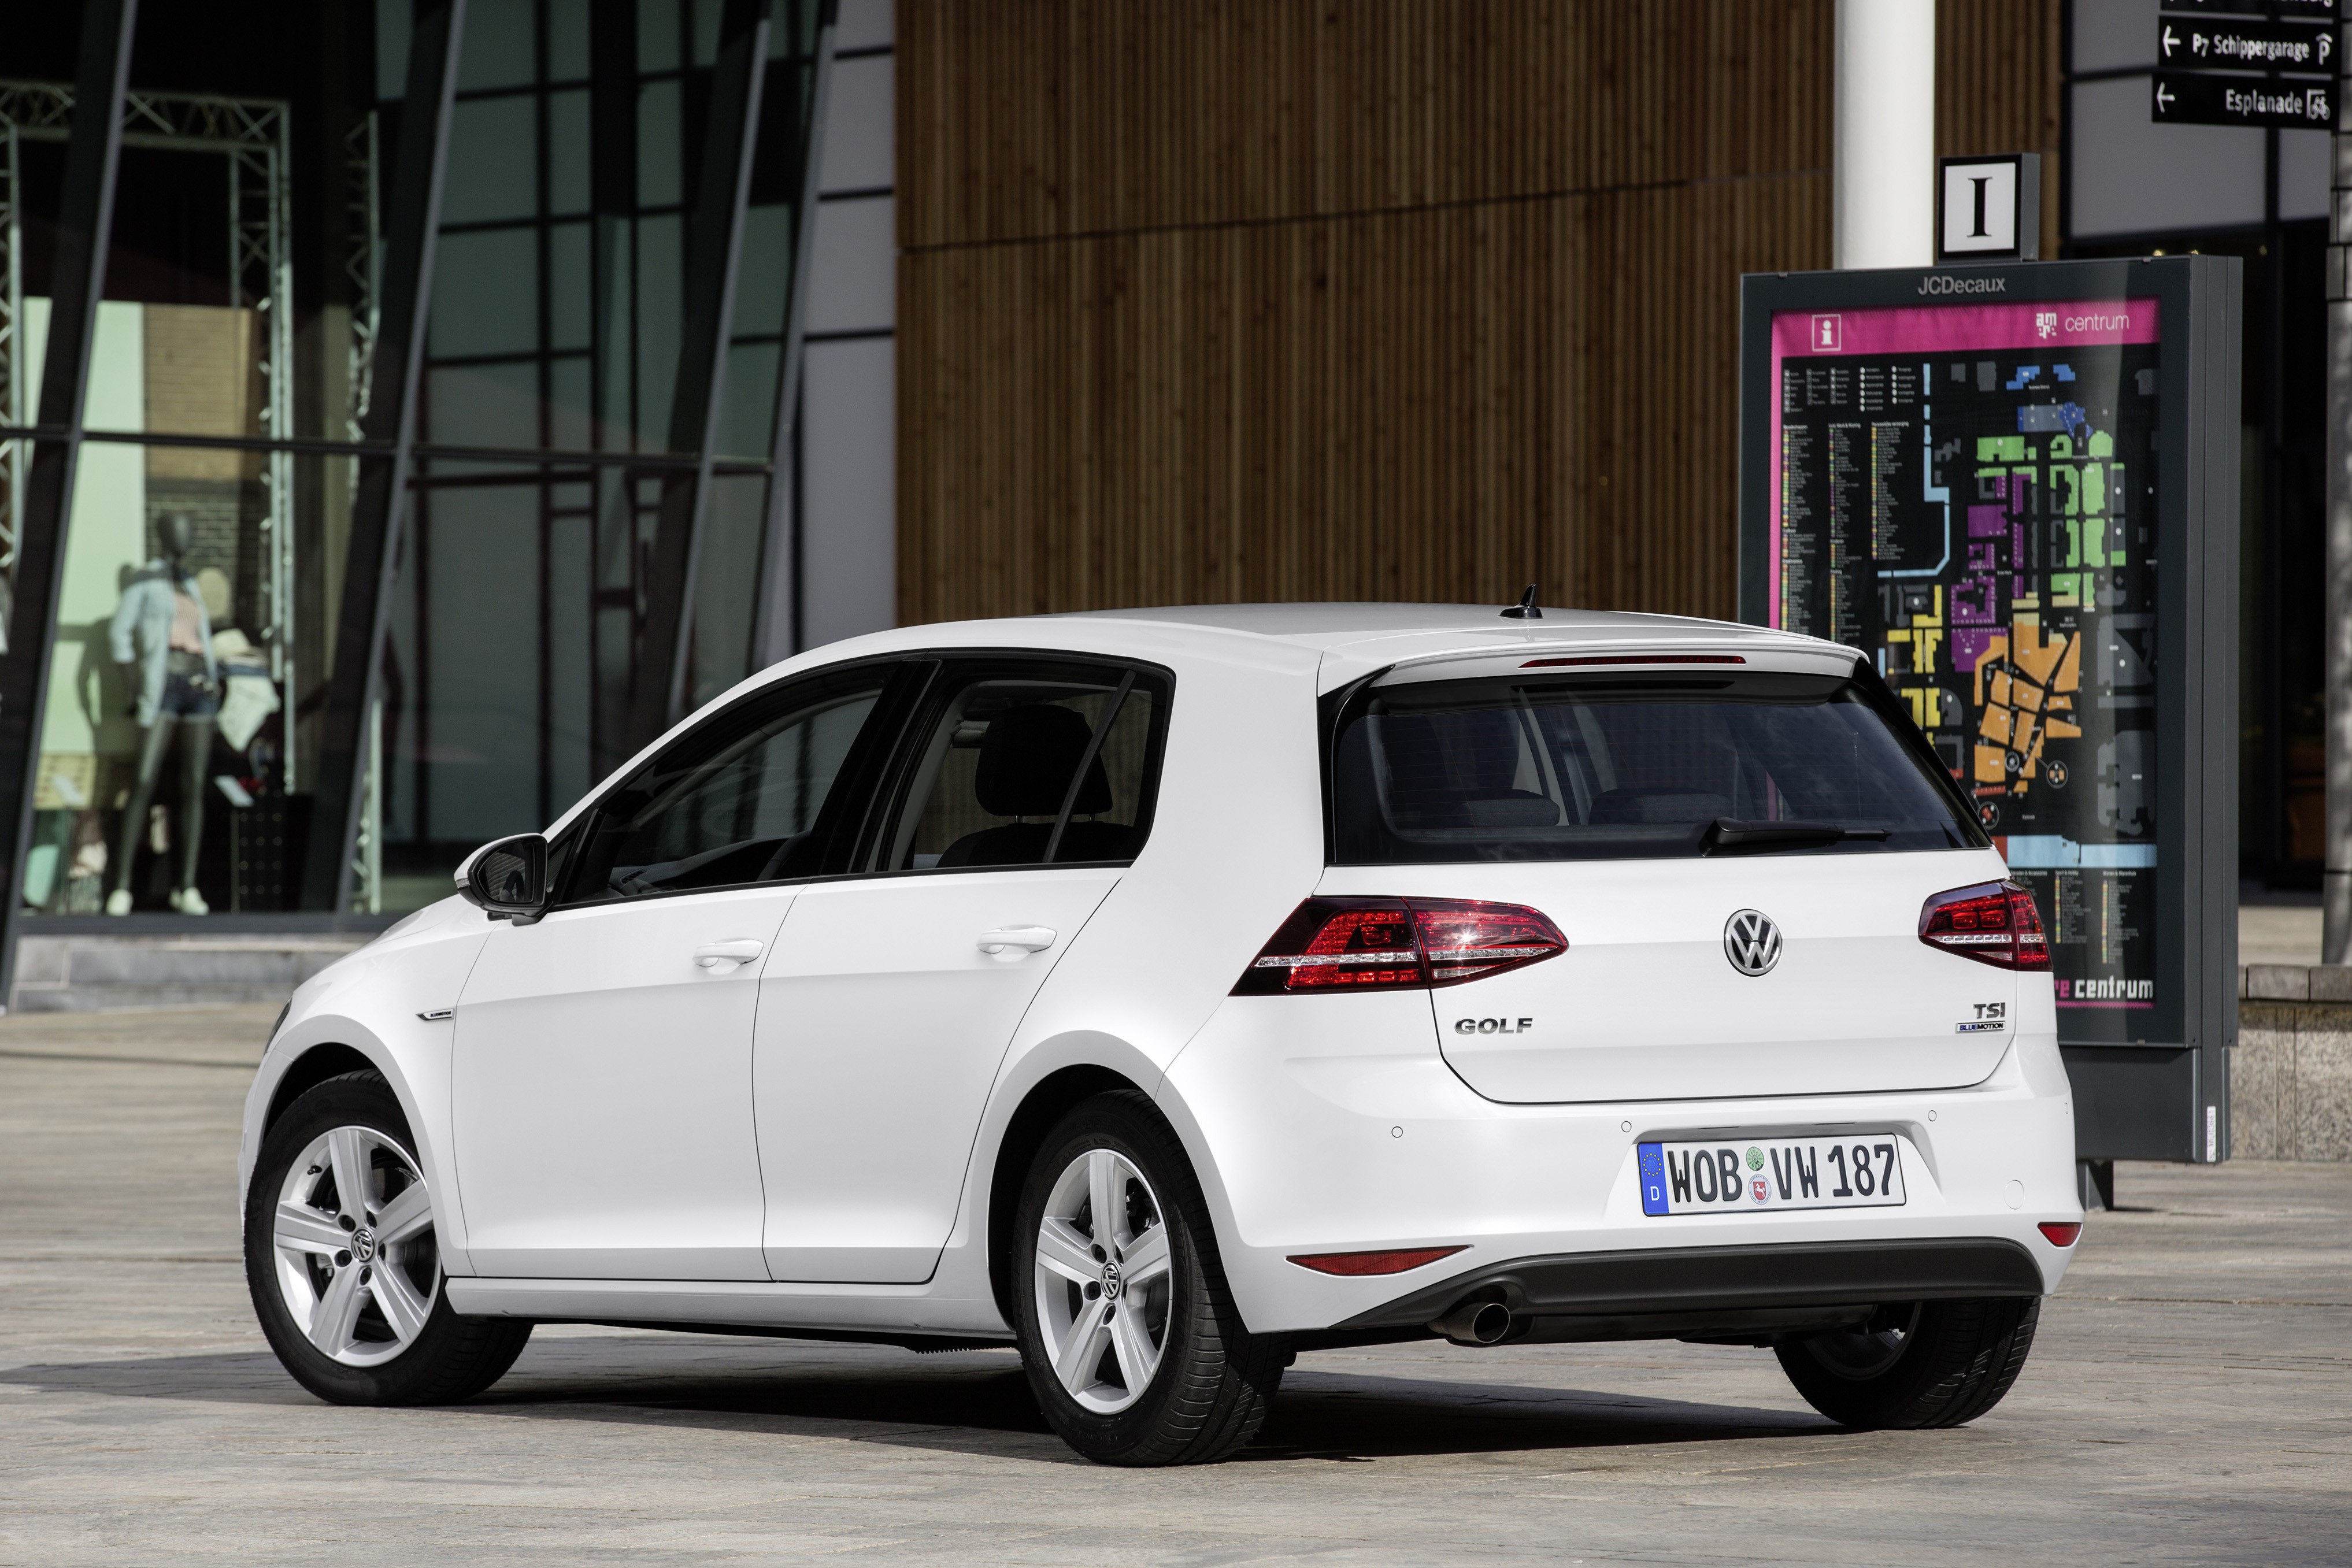 Volkswagen Golf 1.0 TSI BlueMotion Debuts With 3-Cylinder Turbo Engine ...